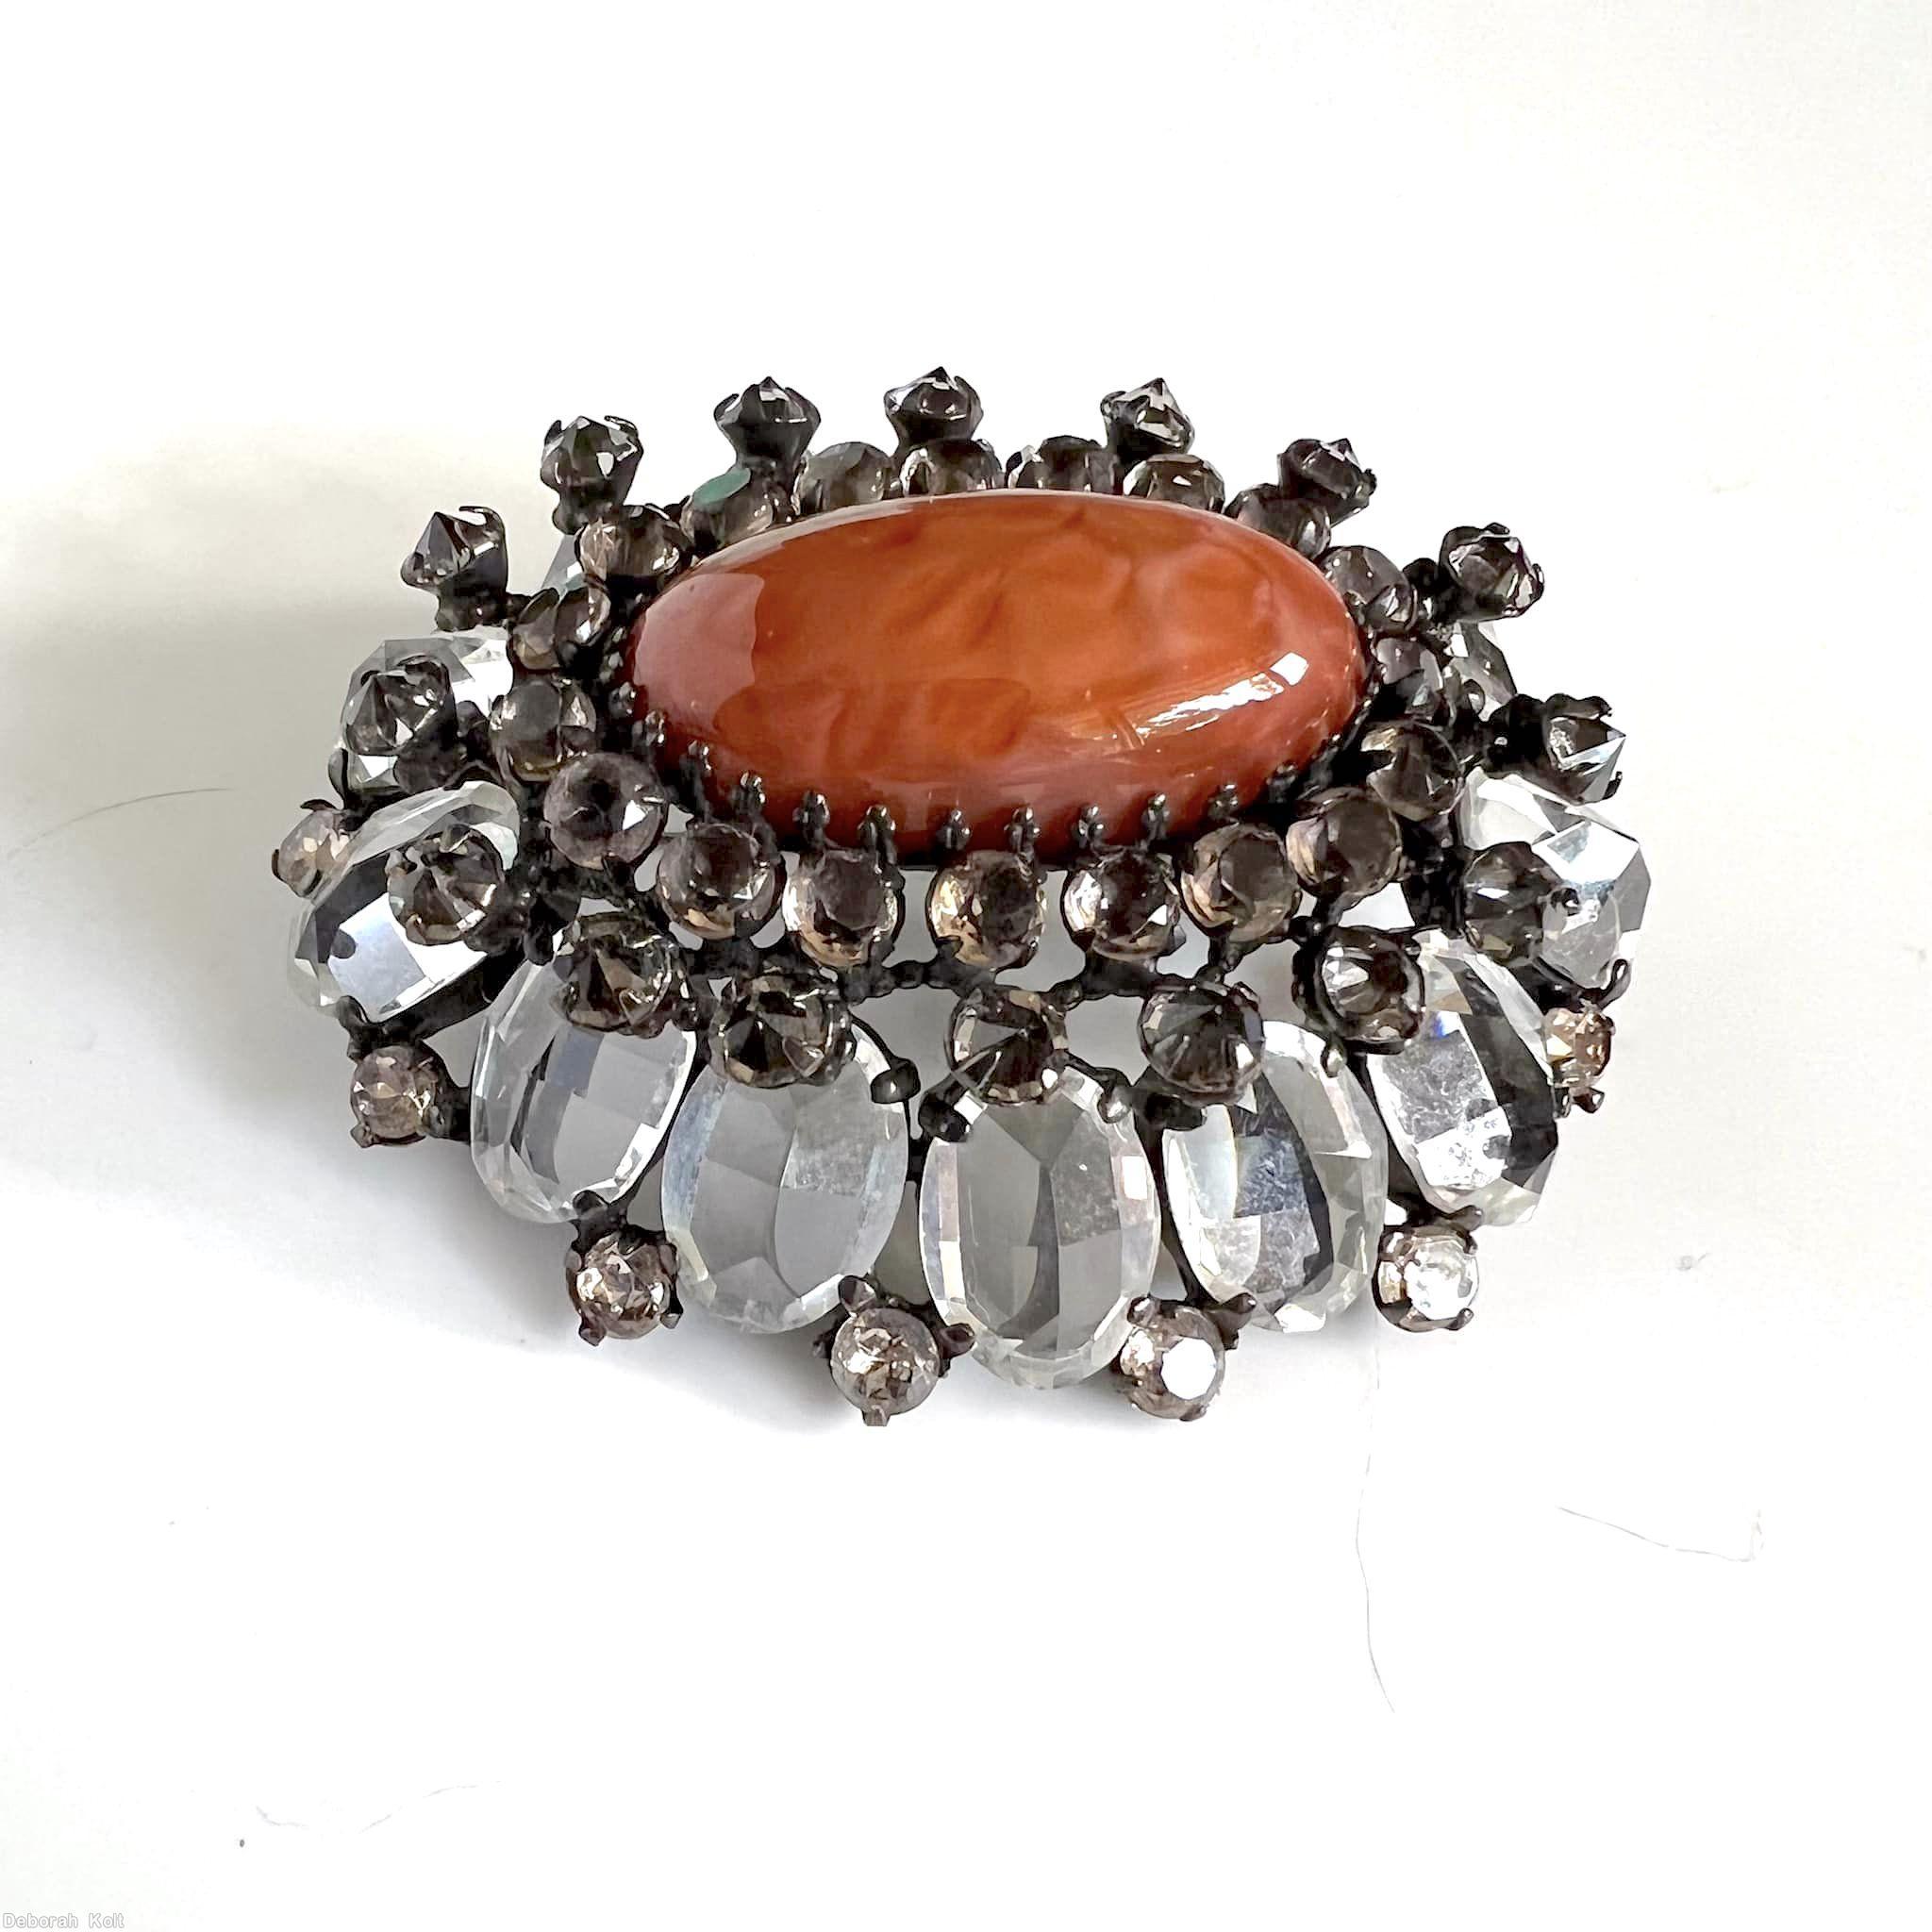 Schreiner oval domed 13 side oval stone pin large oval center 20 surrounding small stone 16 pearls large faceted oval crystal carnelian large oval cab center smoky small chaton silvertone jewelry